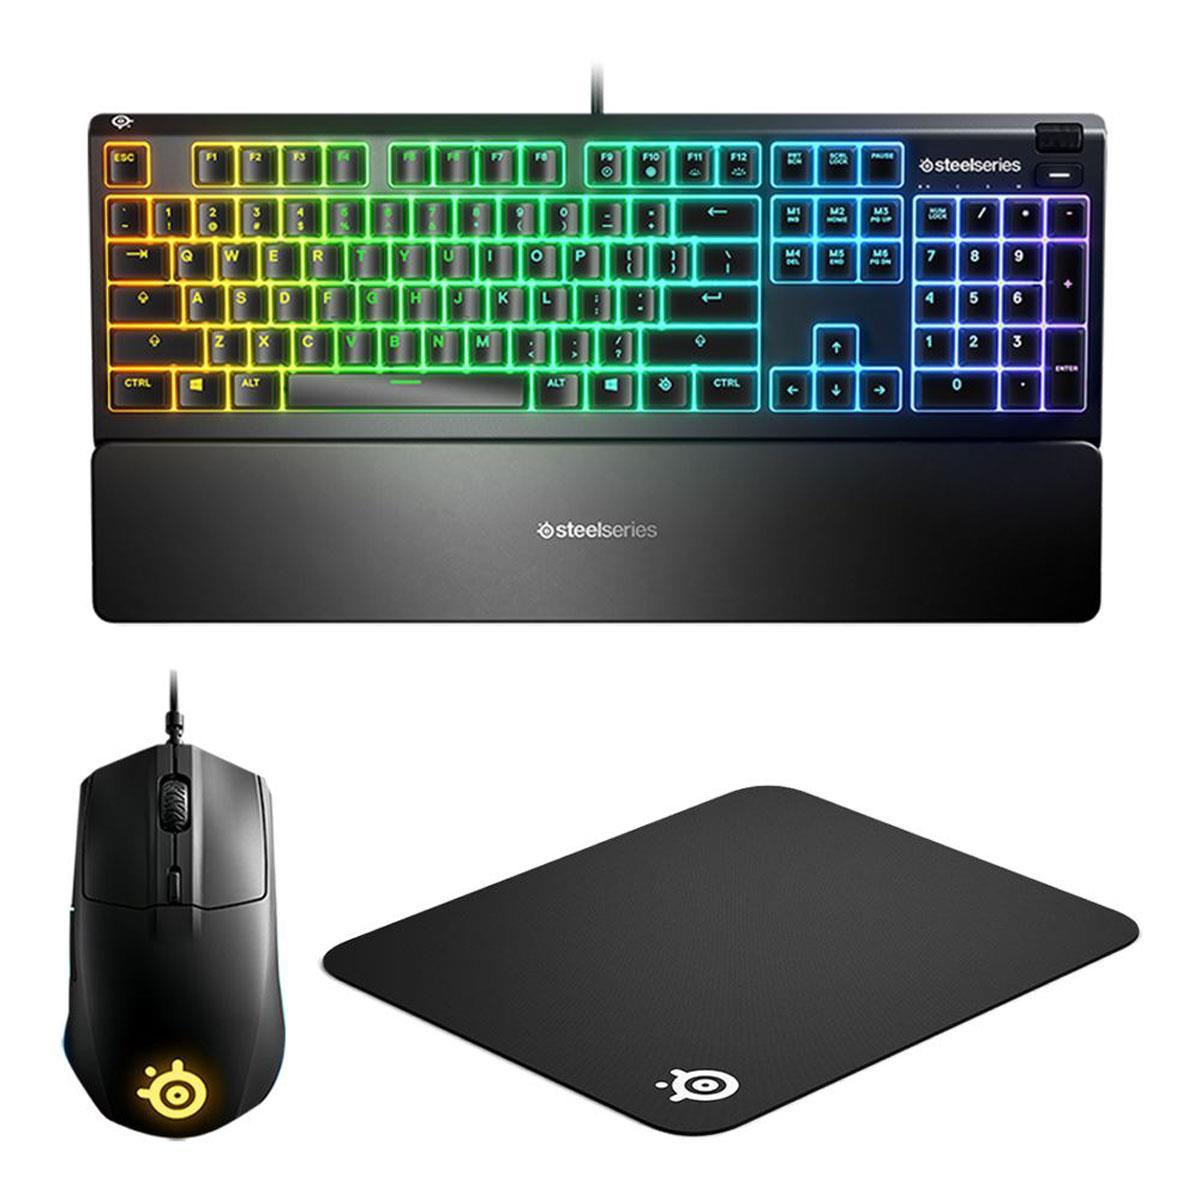 Steelseries Apex 3 RGB Keyboard with Rival 3 Mouse and Mousepad for $34.99 Shipped